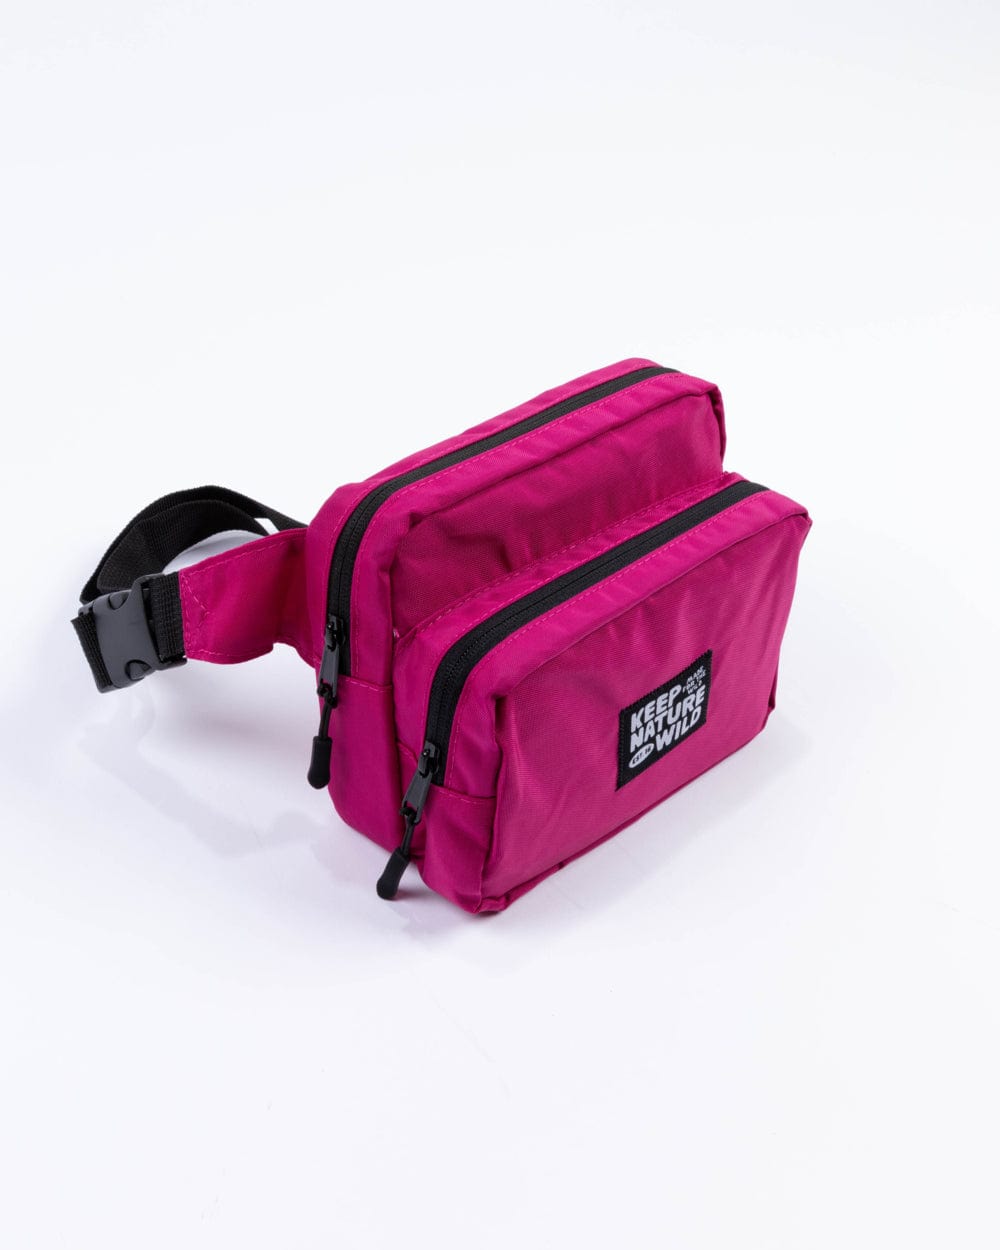 Keep Nature Wild Fanny Pack KNW Fanny Pack | Fuchsia